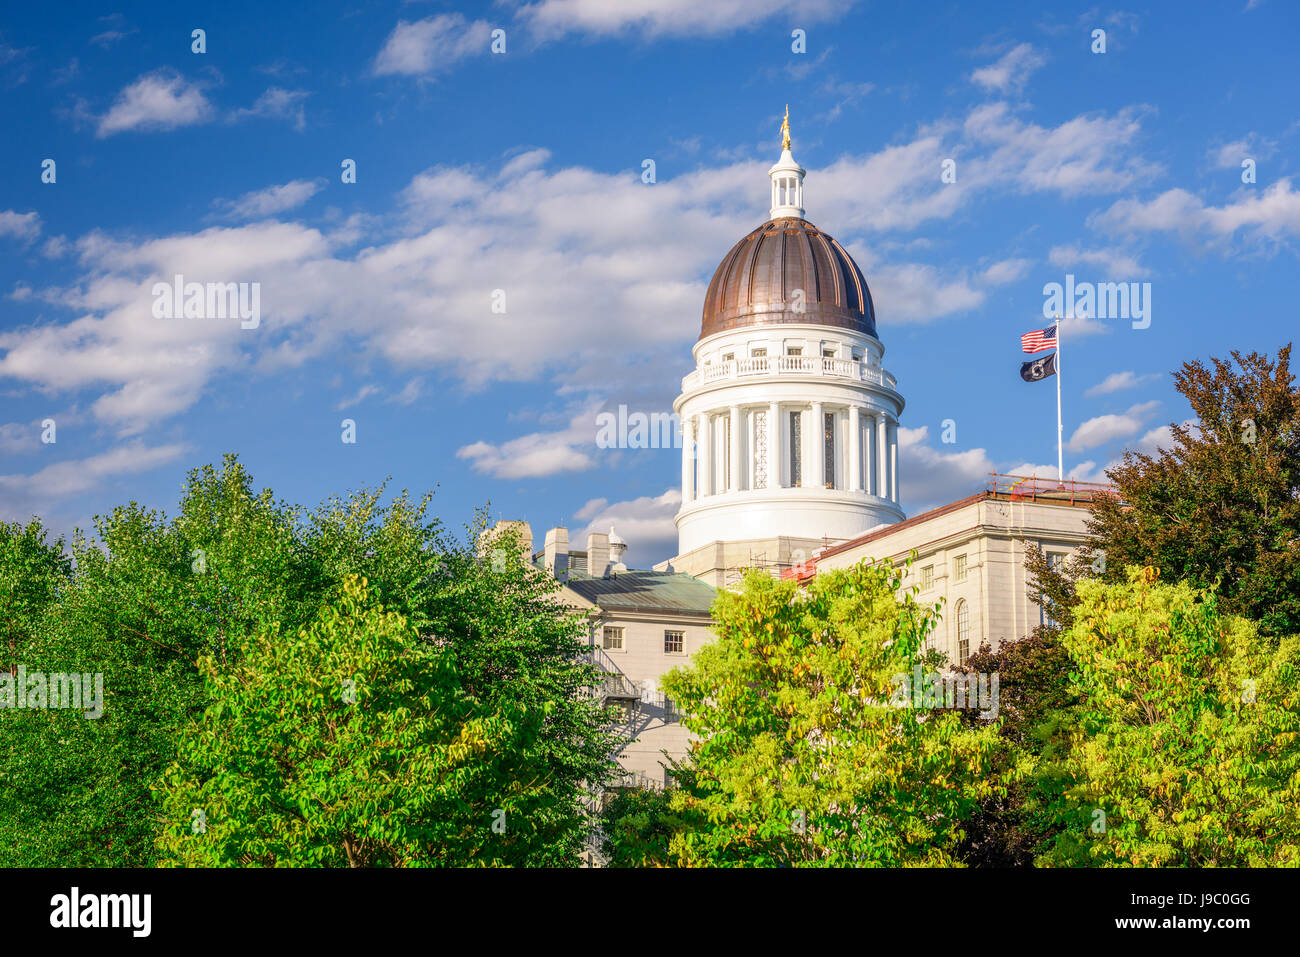 The Maine State House in Augusta, Maine, USA. Stock Photo